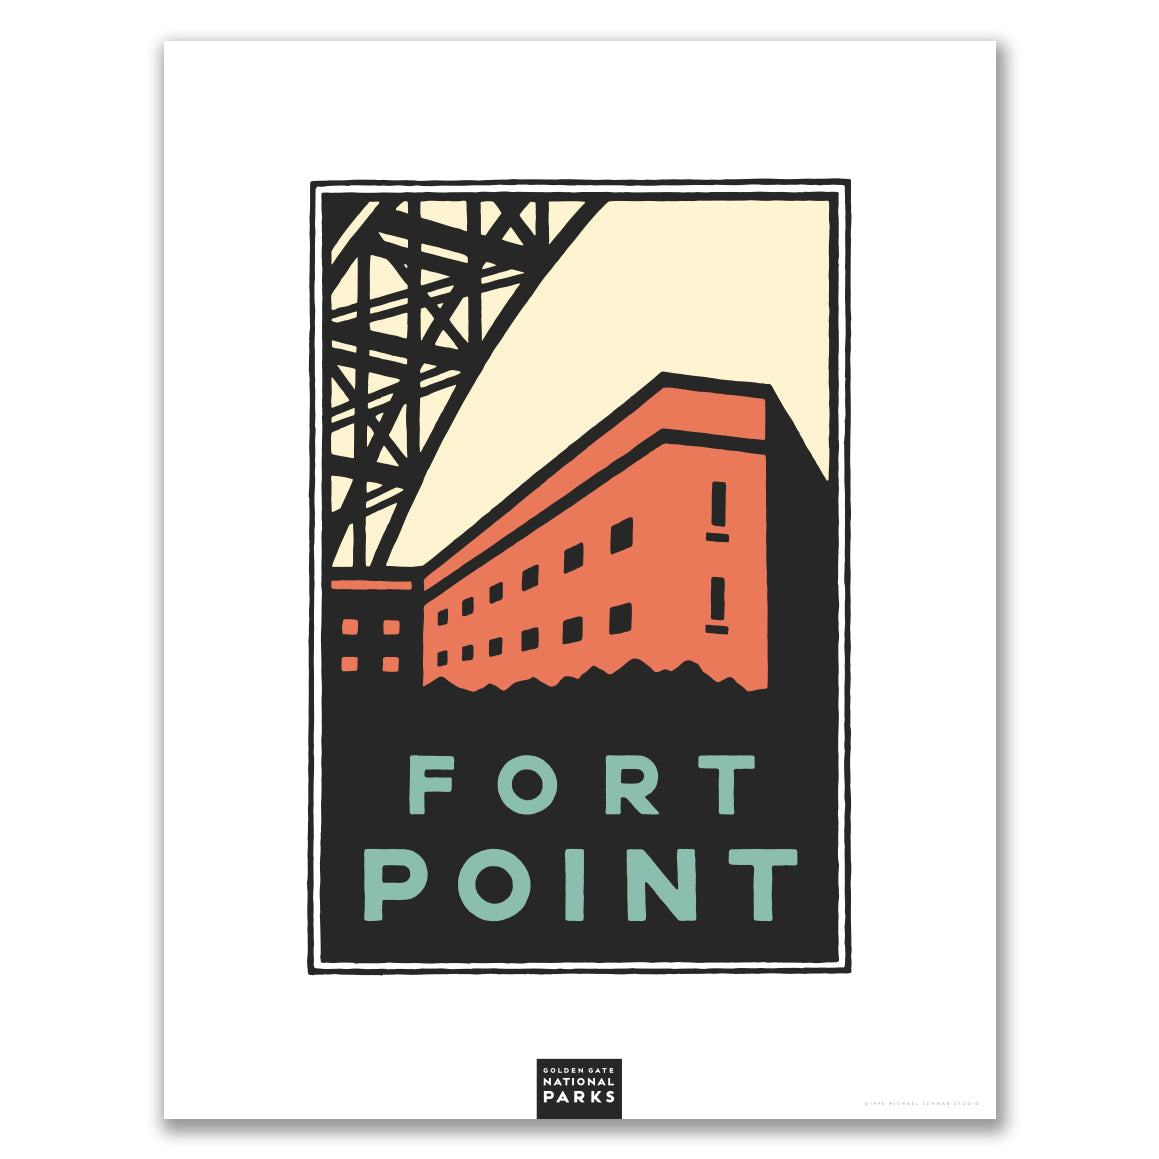 Multicolor Fort Point giclee poster print, with art by Michael Schwab